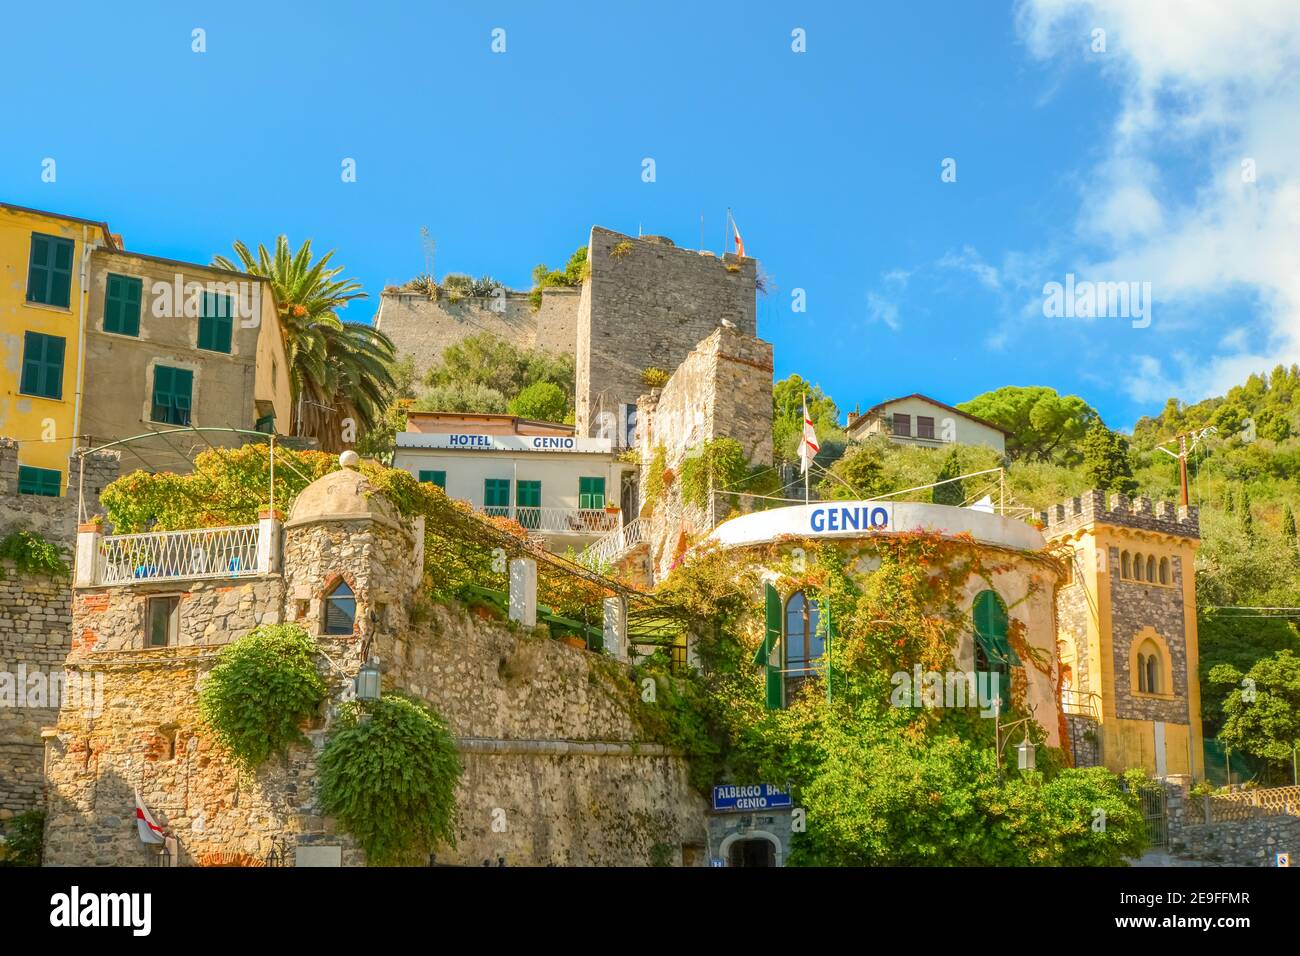 The entrance to a hotel underneath the fort and castle of the resort coastal town of Portovenere, Italy, on the Ligurian coast. Stock Photo